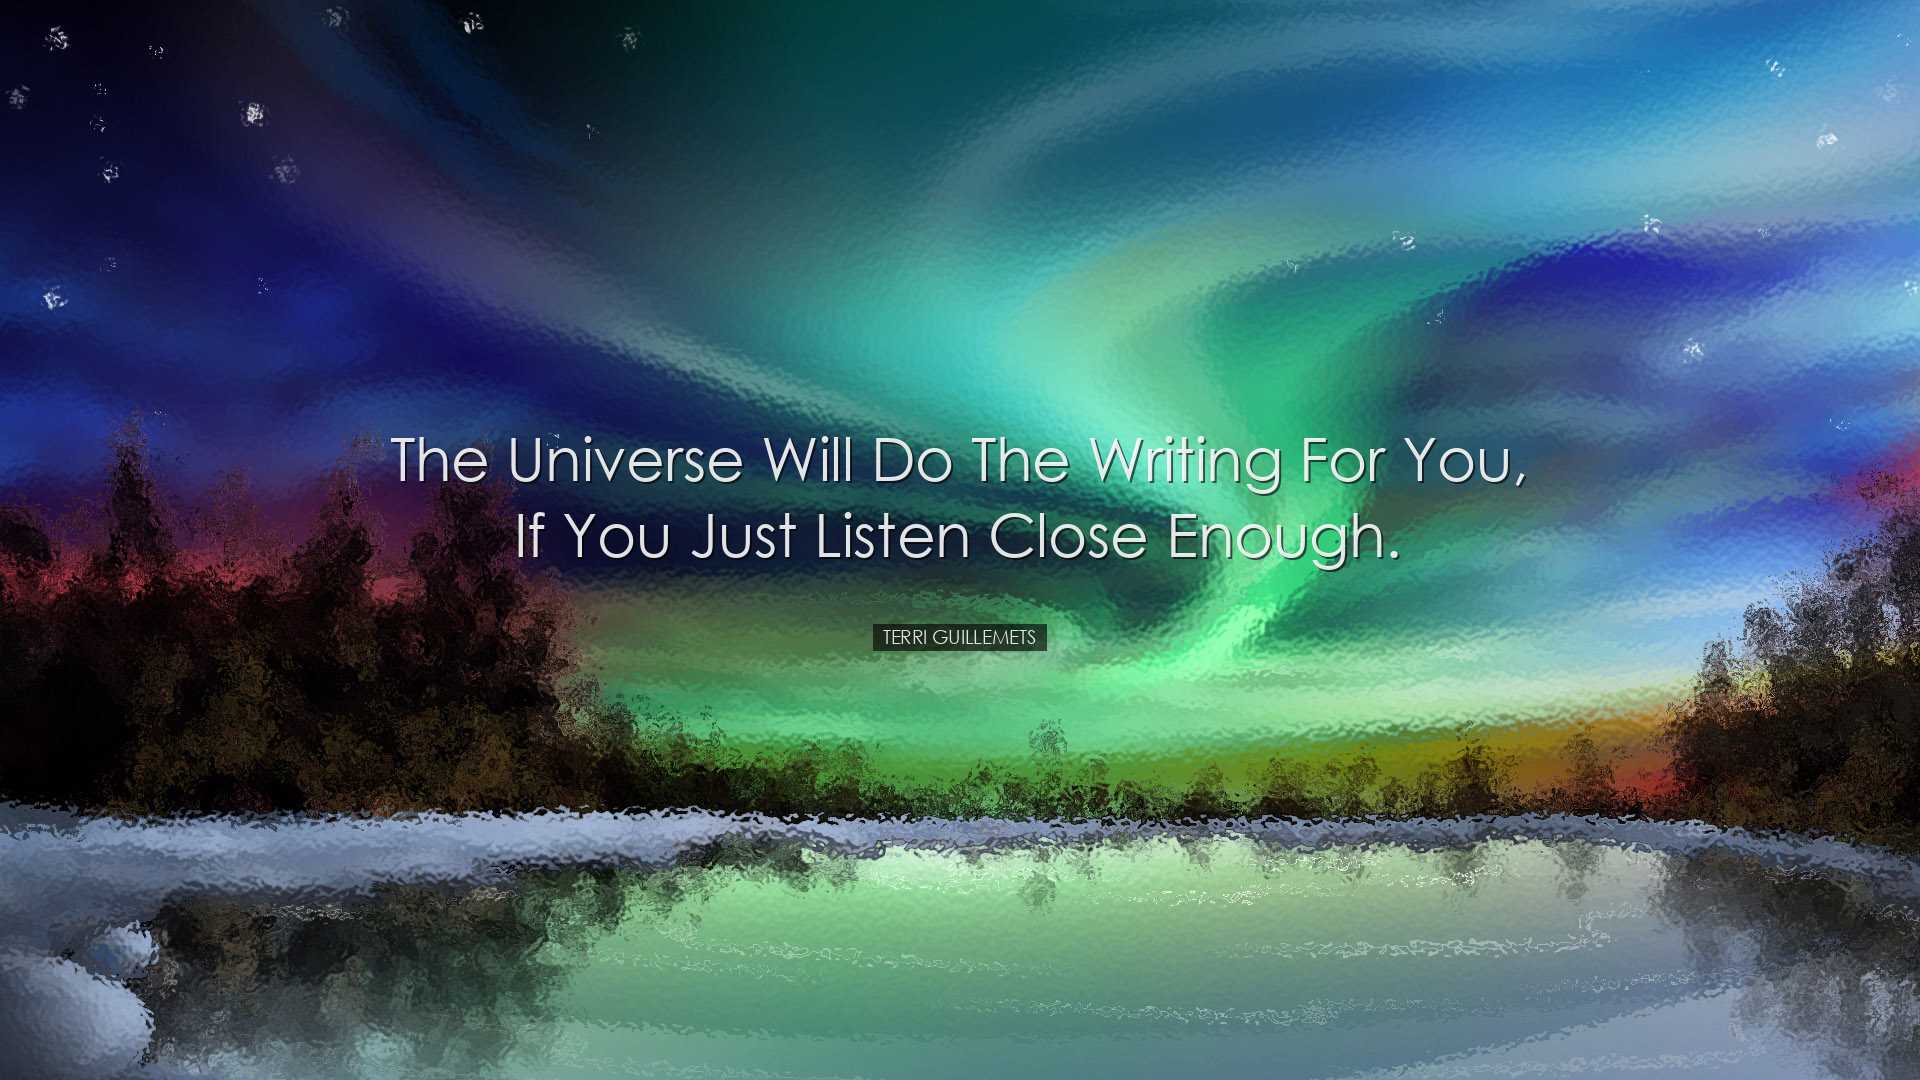 The universe will do the writing for you, if you just listen close